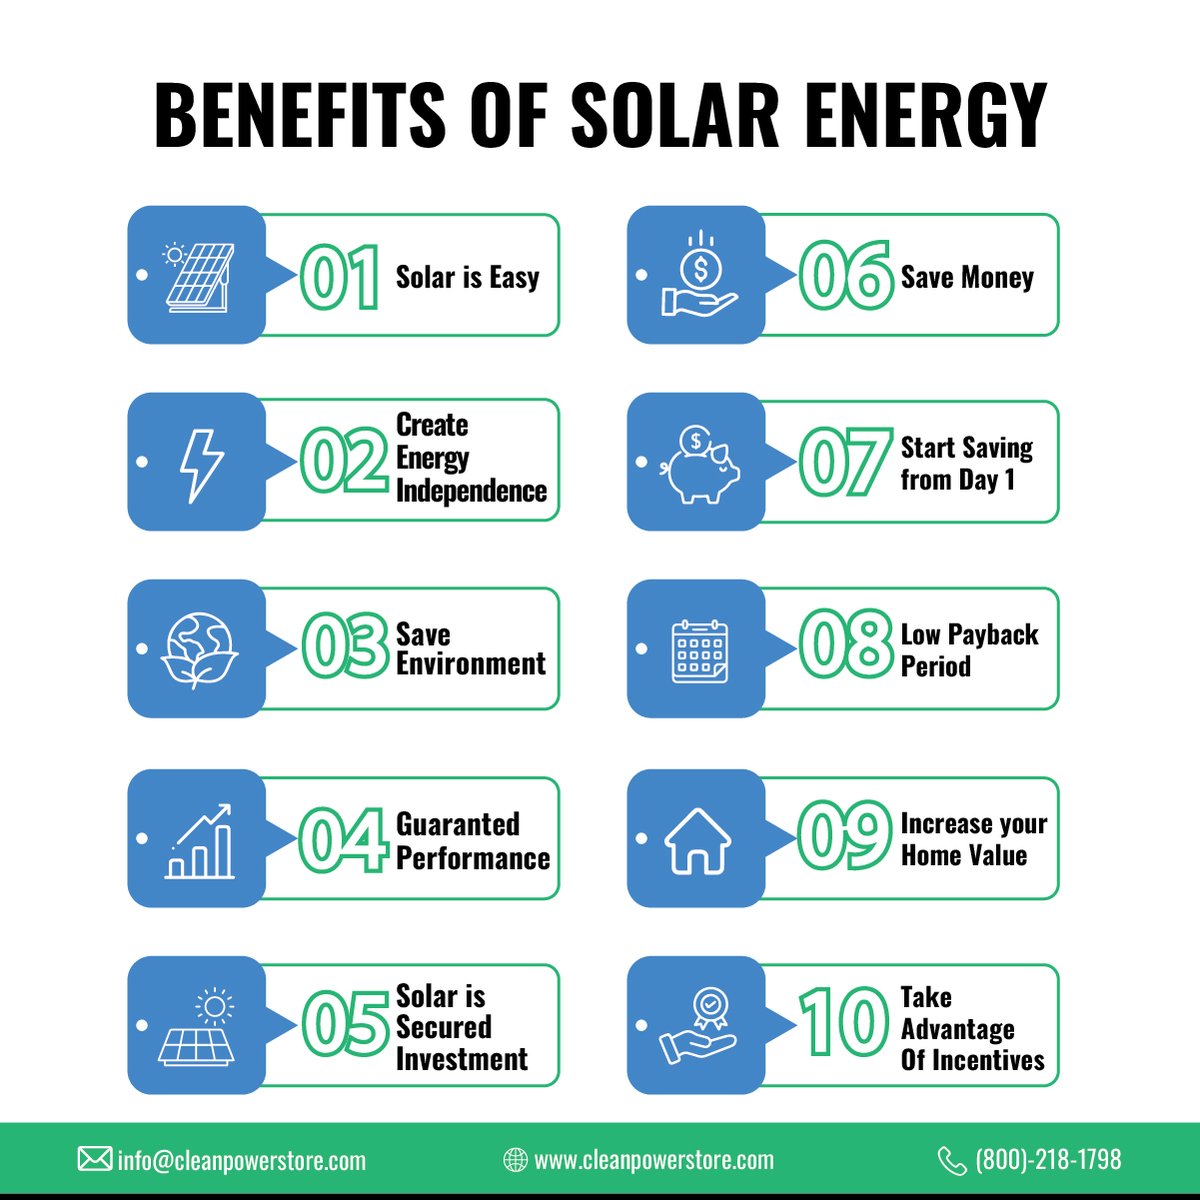 Benefits of #solar #energy are a lot of benefits to this system of energy. 
Click here 👉cleanpowerstore.com to visit.

#solarpower #solarpanels #solarenergy #solarsystem #solarpowered #solarinstallation #gogreen💚 #gosolar #renewableEnergy #sustainableenergy 
#solarPVSystem